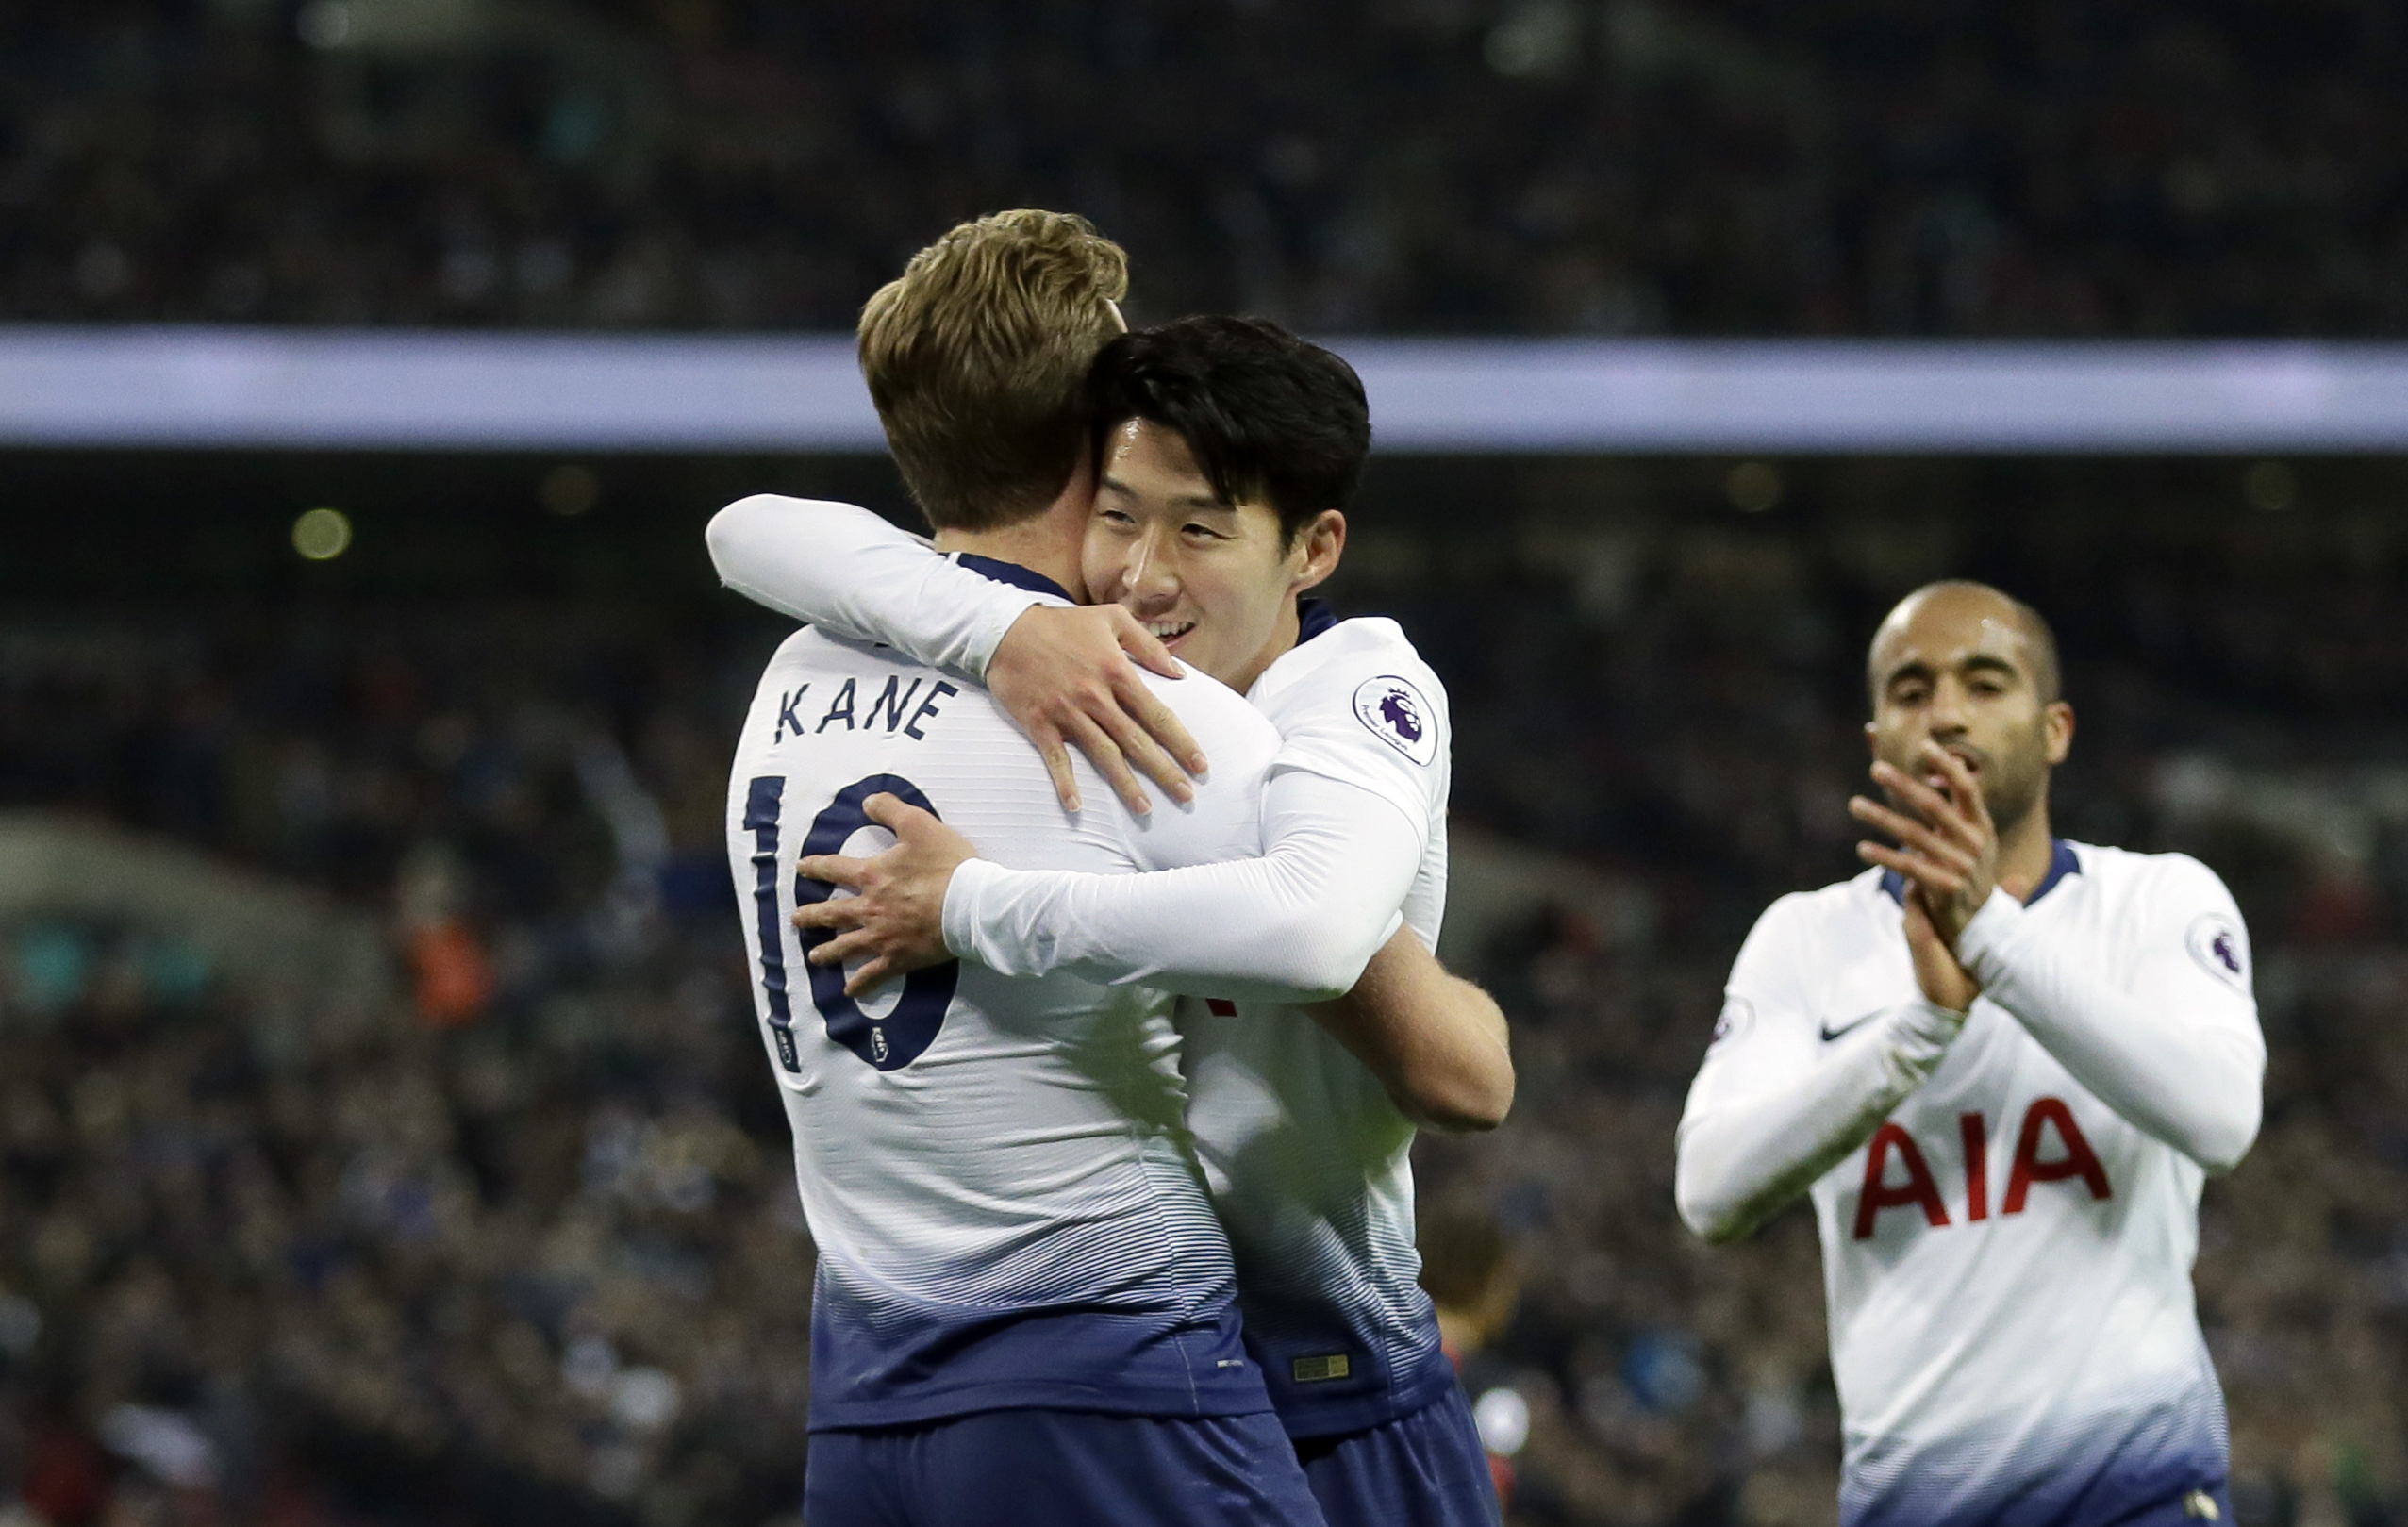 Tottenham up to 2nd in EPL after routing Bournemouth 5-0